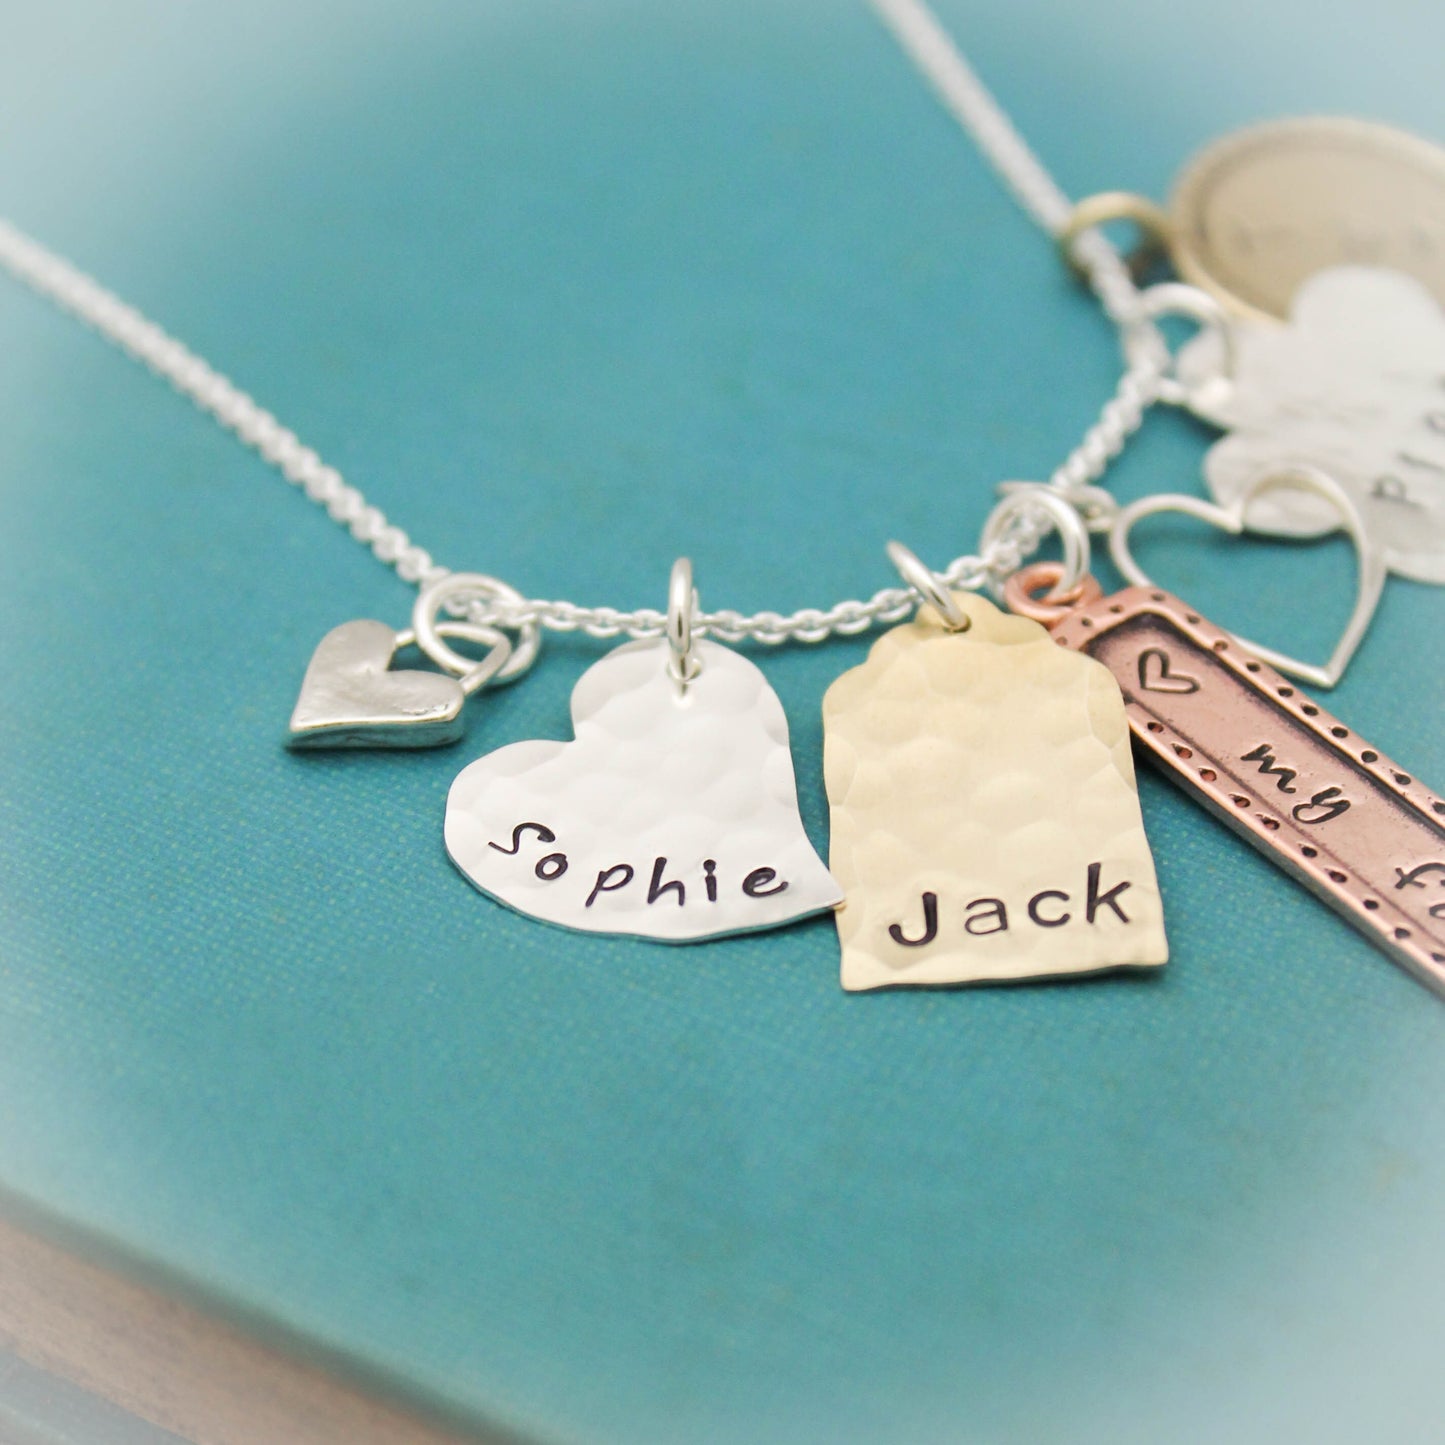 Personalized Charm Necklace, Mommy Necklace, Family Jewelry, Hand Stamped Jewelry, Mixed Metals Necklace, Mother's Day Gifts, Gifts for Her